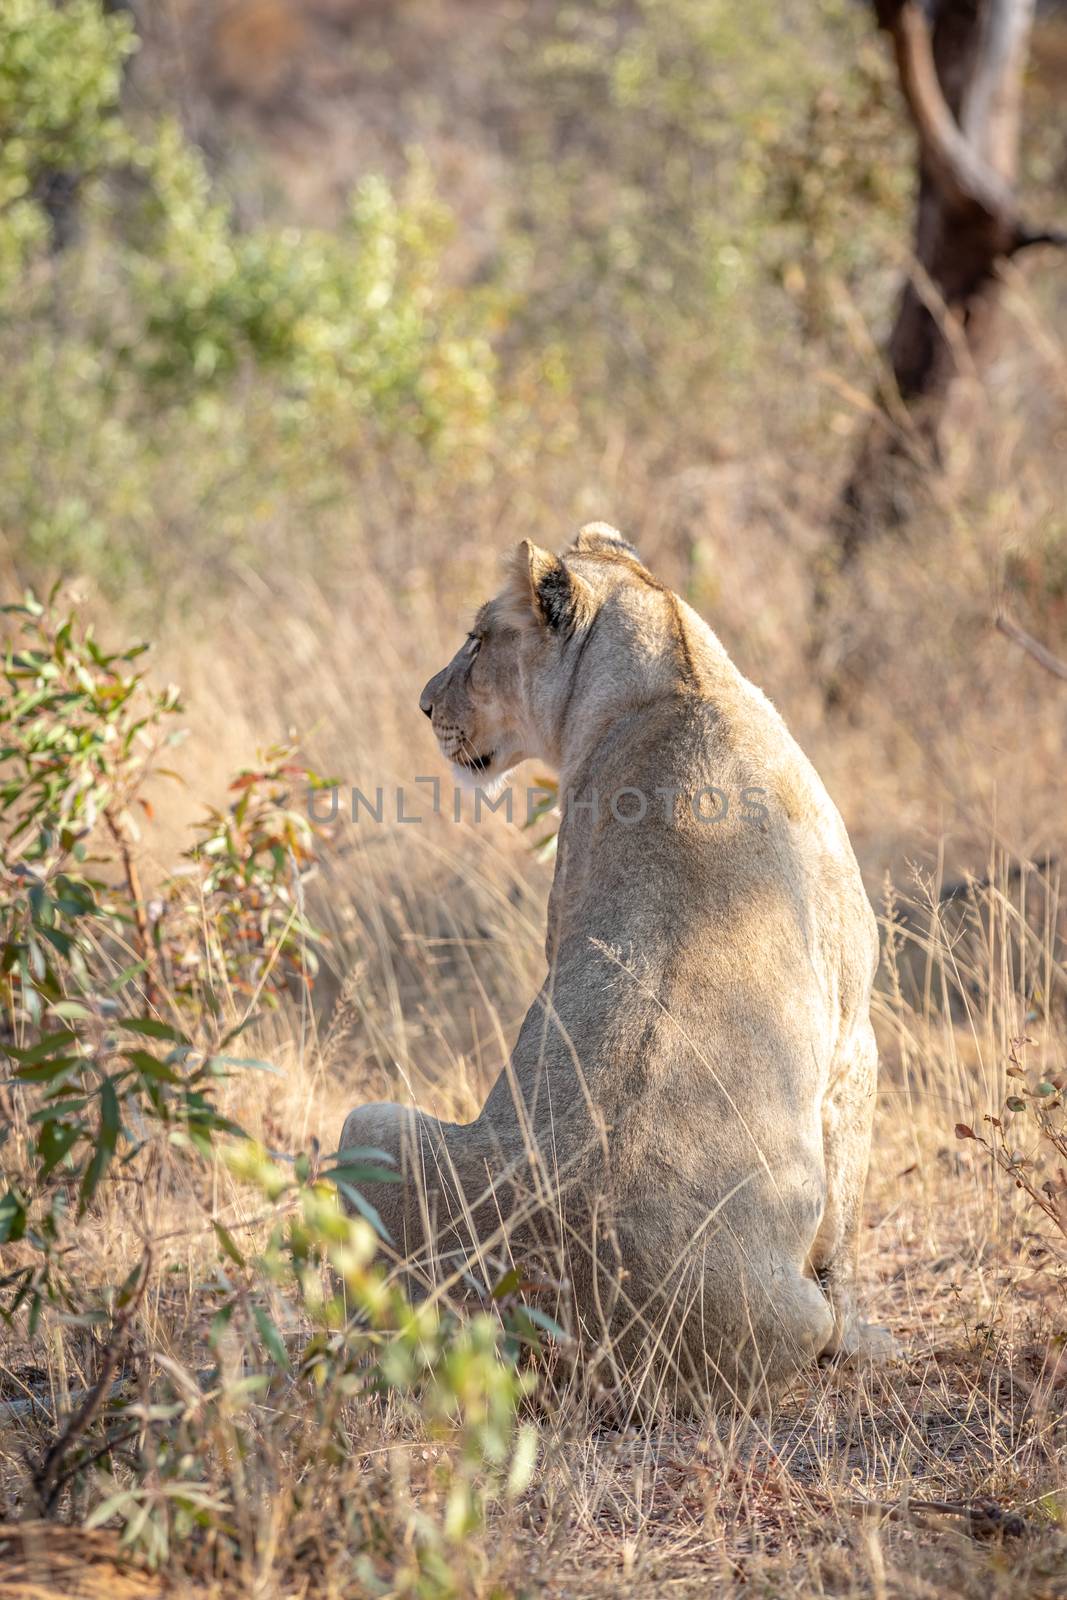 Lioness sitting in the grass and looking. by Simoneemanphotography